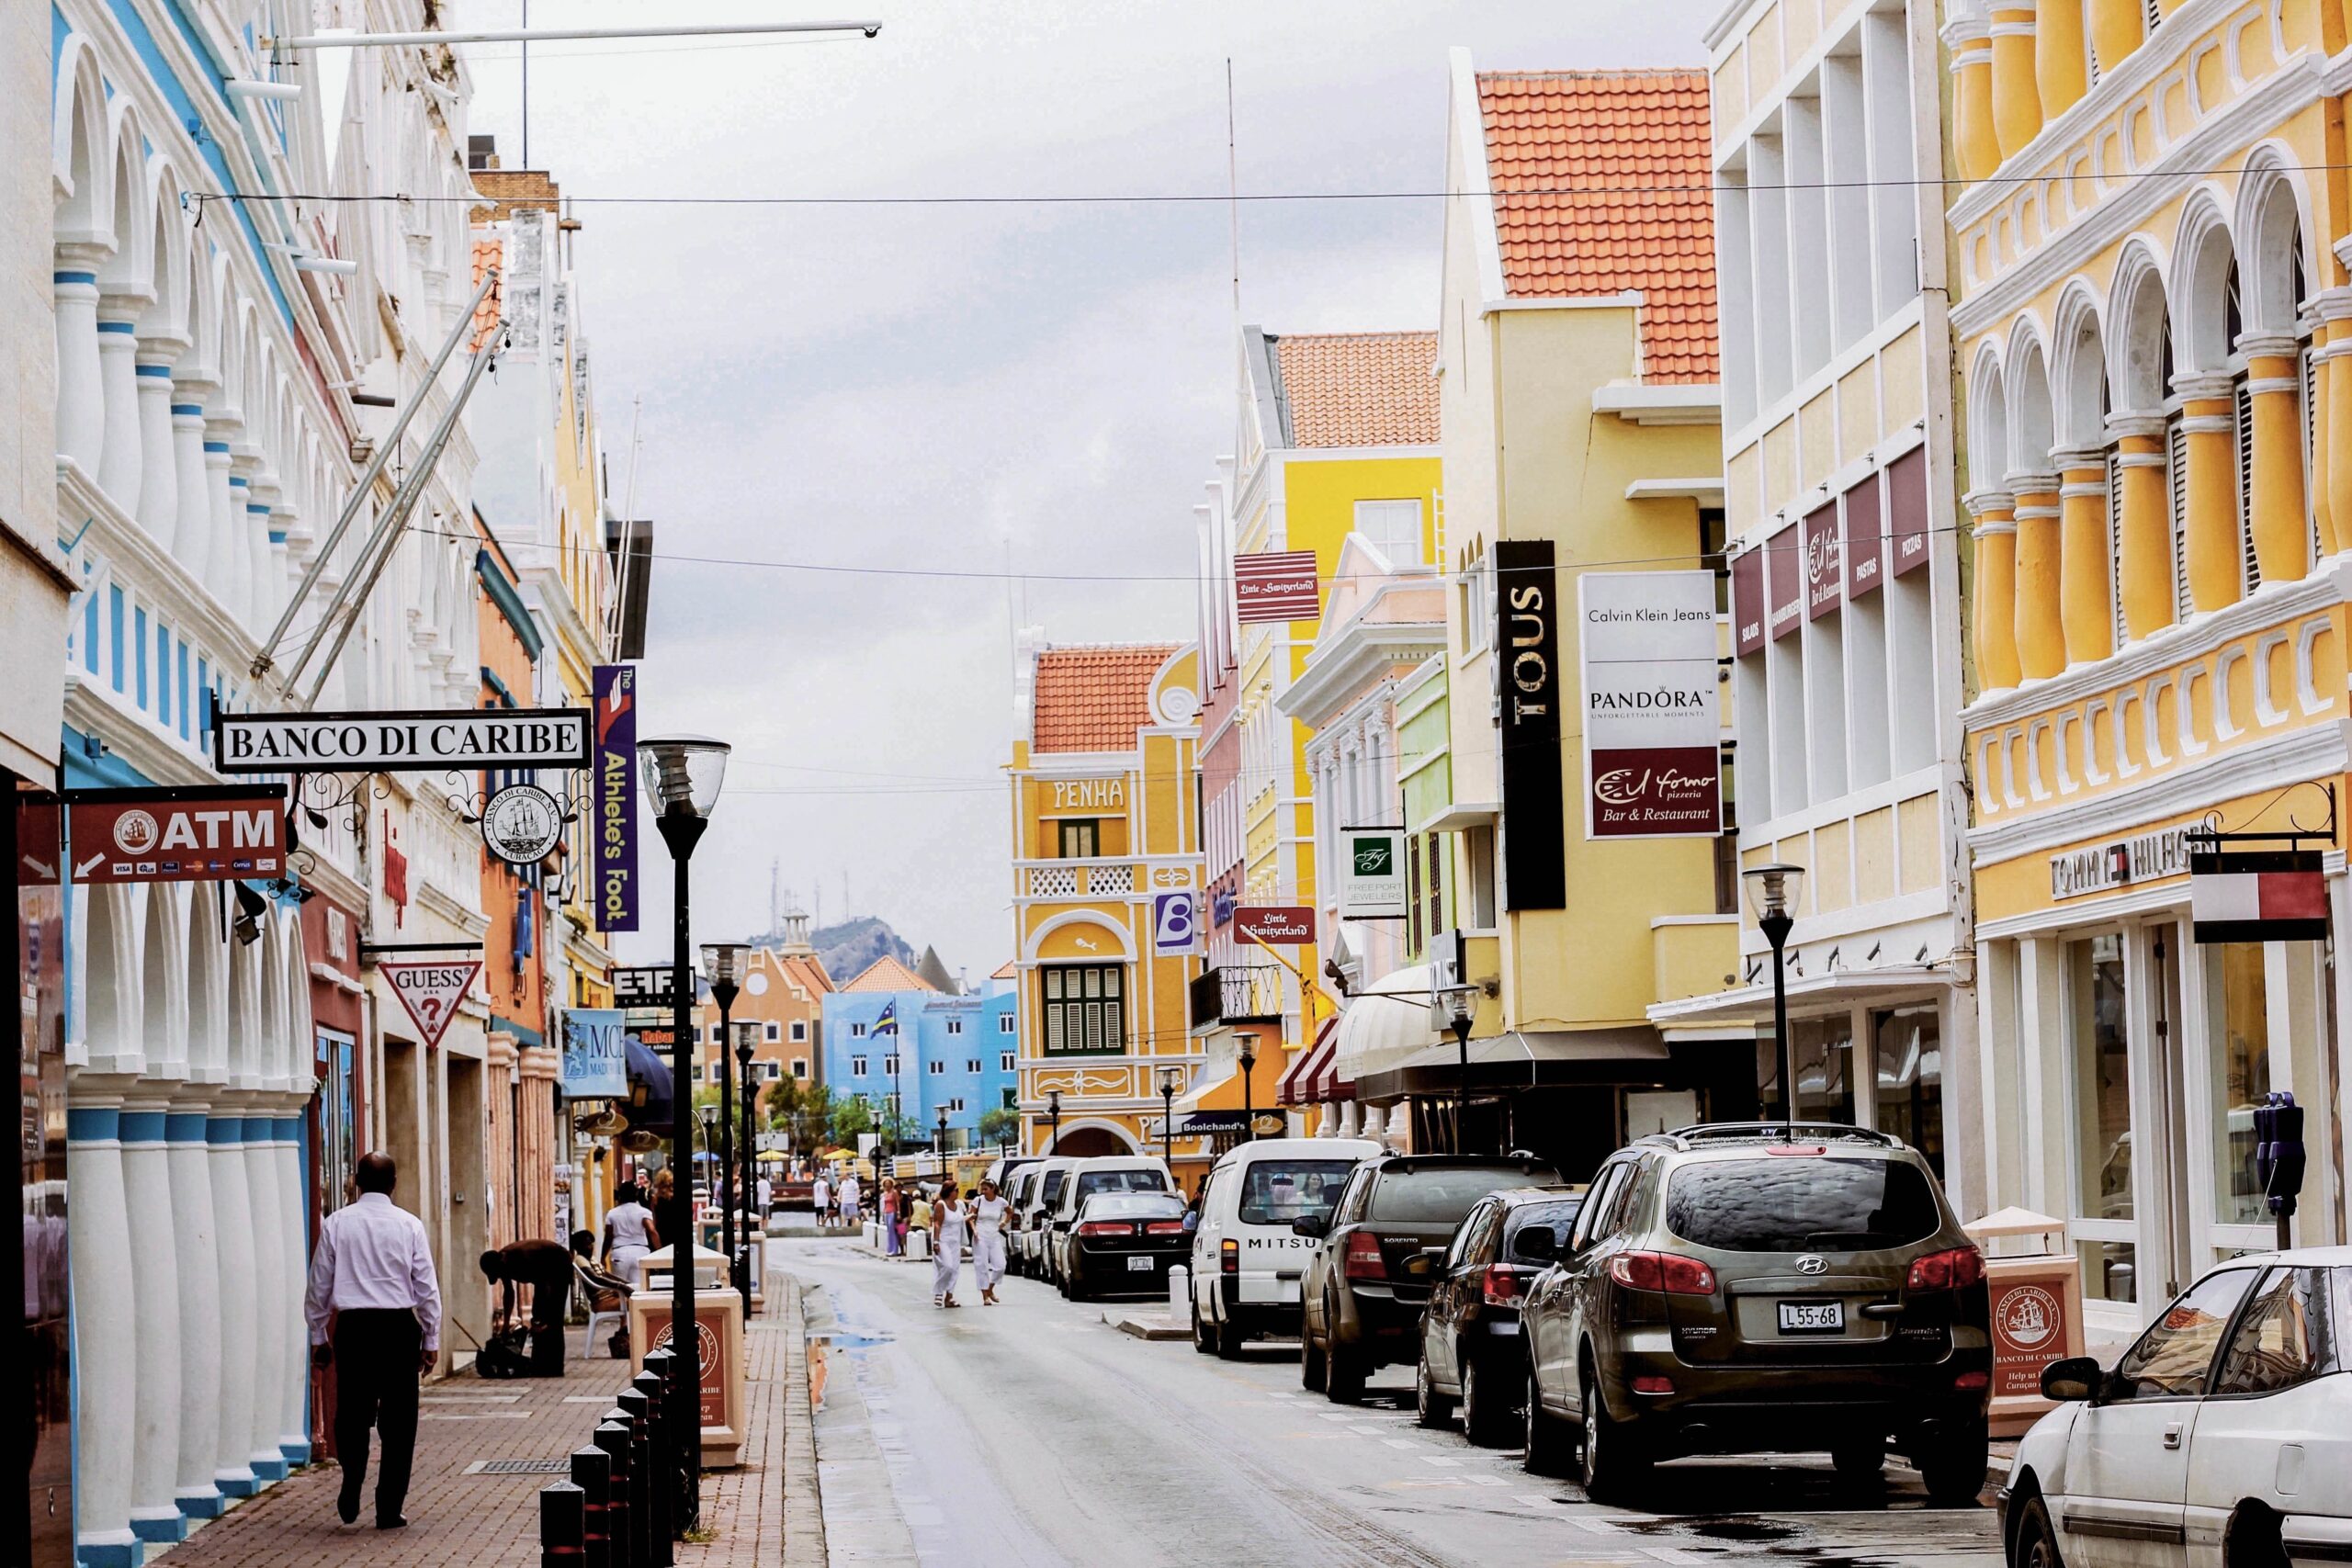 The city of Curaçao is quaint and has welcoming community. The island is a  safe place for travelers and has a thriving culture. 
pictured: the downtown area of Curaçao with pedestrians walking from shop to shop and cars parked on the street